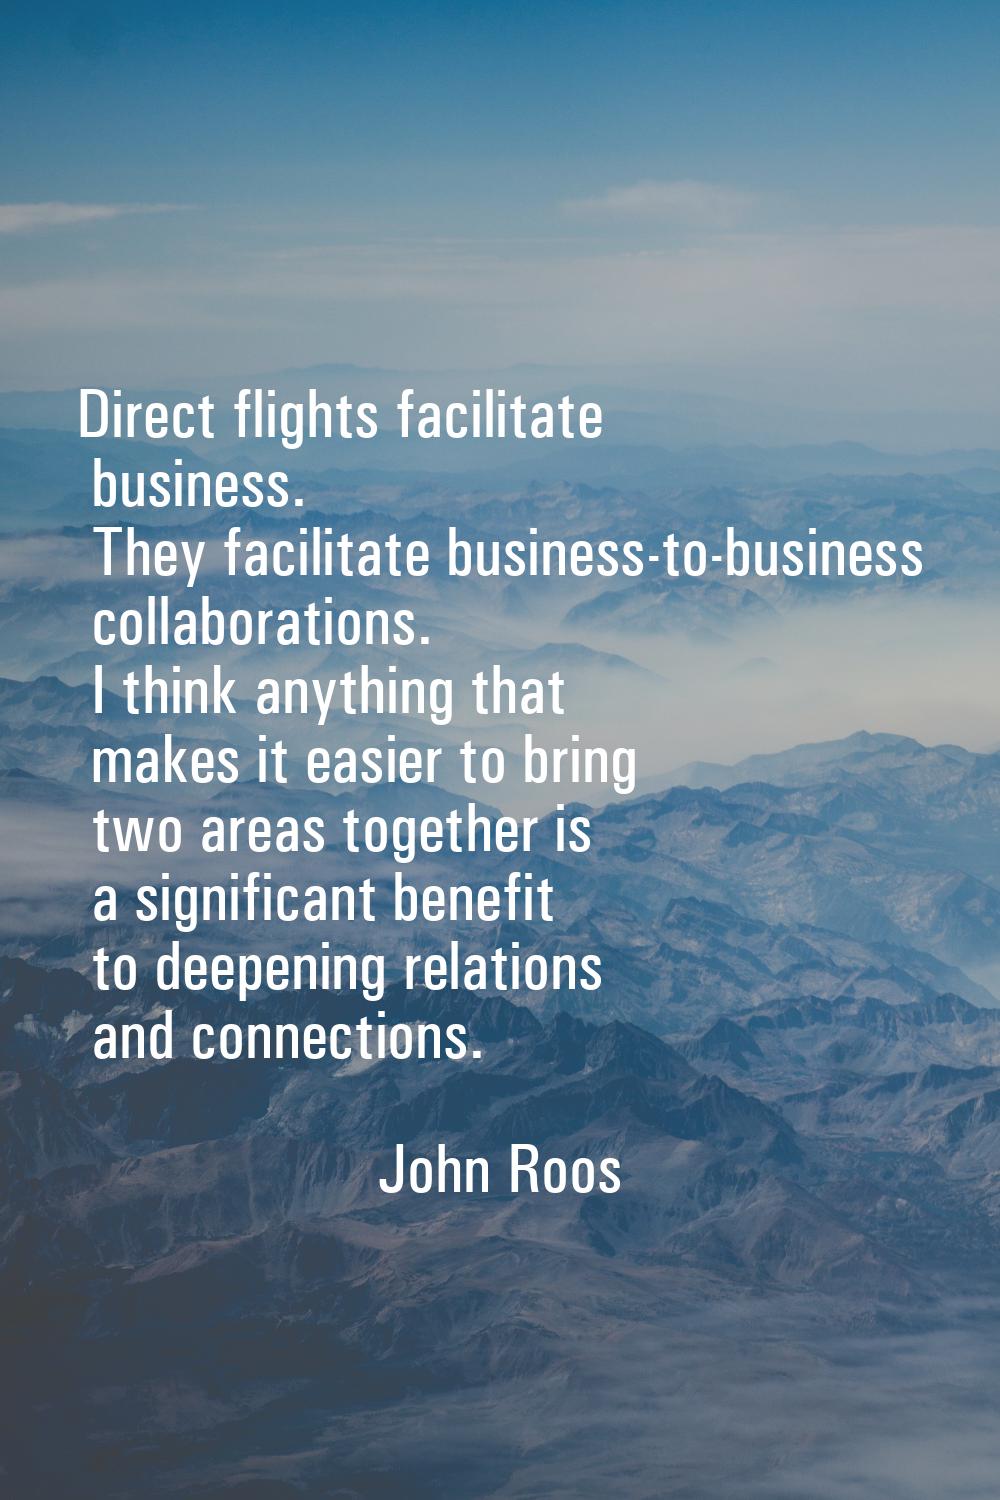 Direct flights facilitate business. They facilitate business-to-business collaborations. I think an